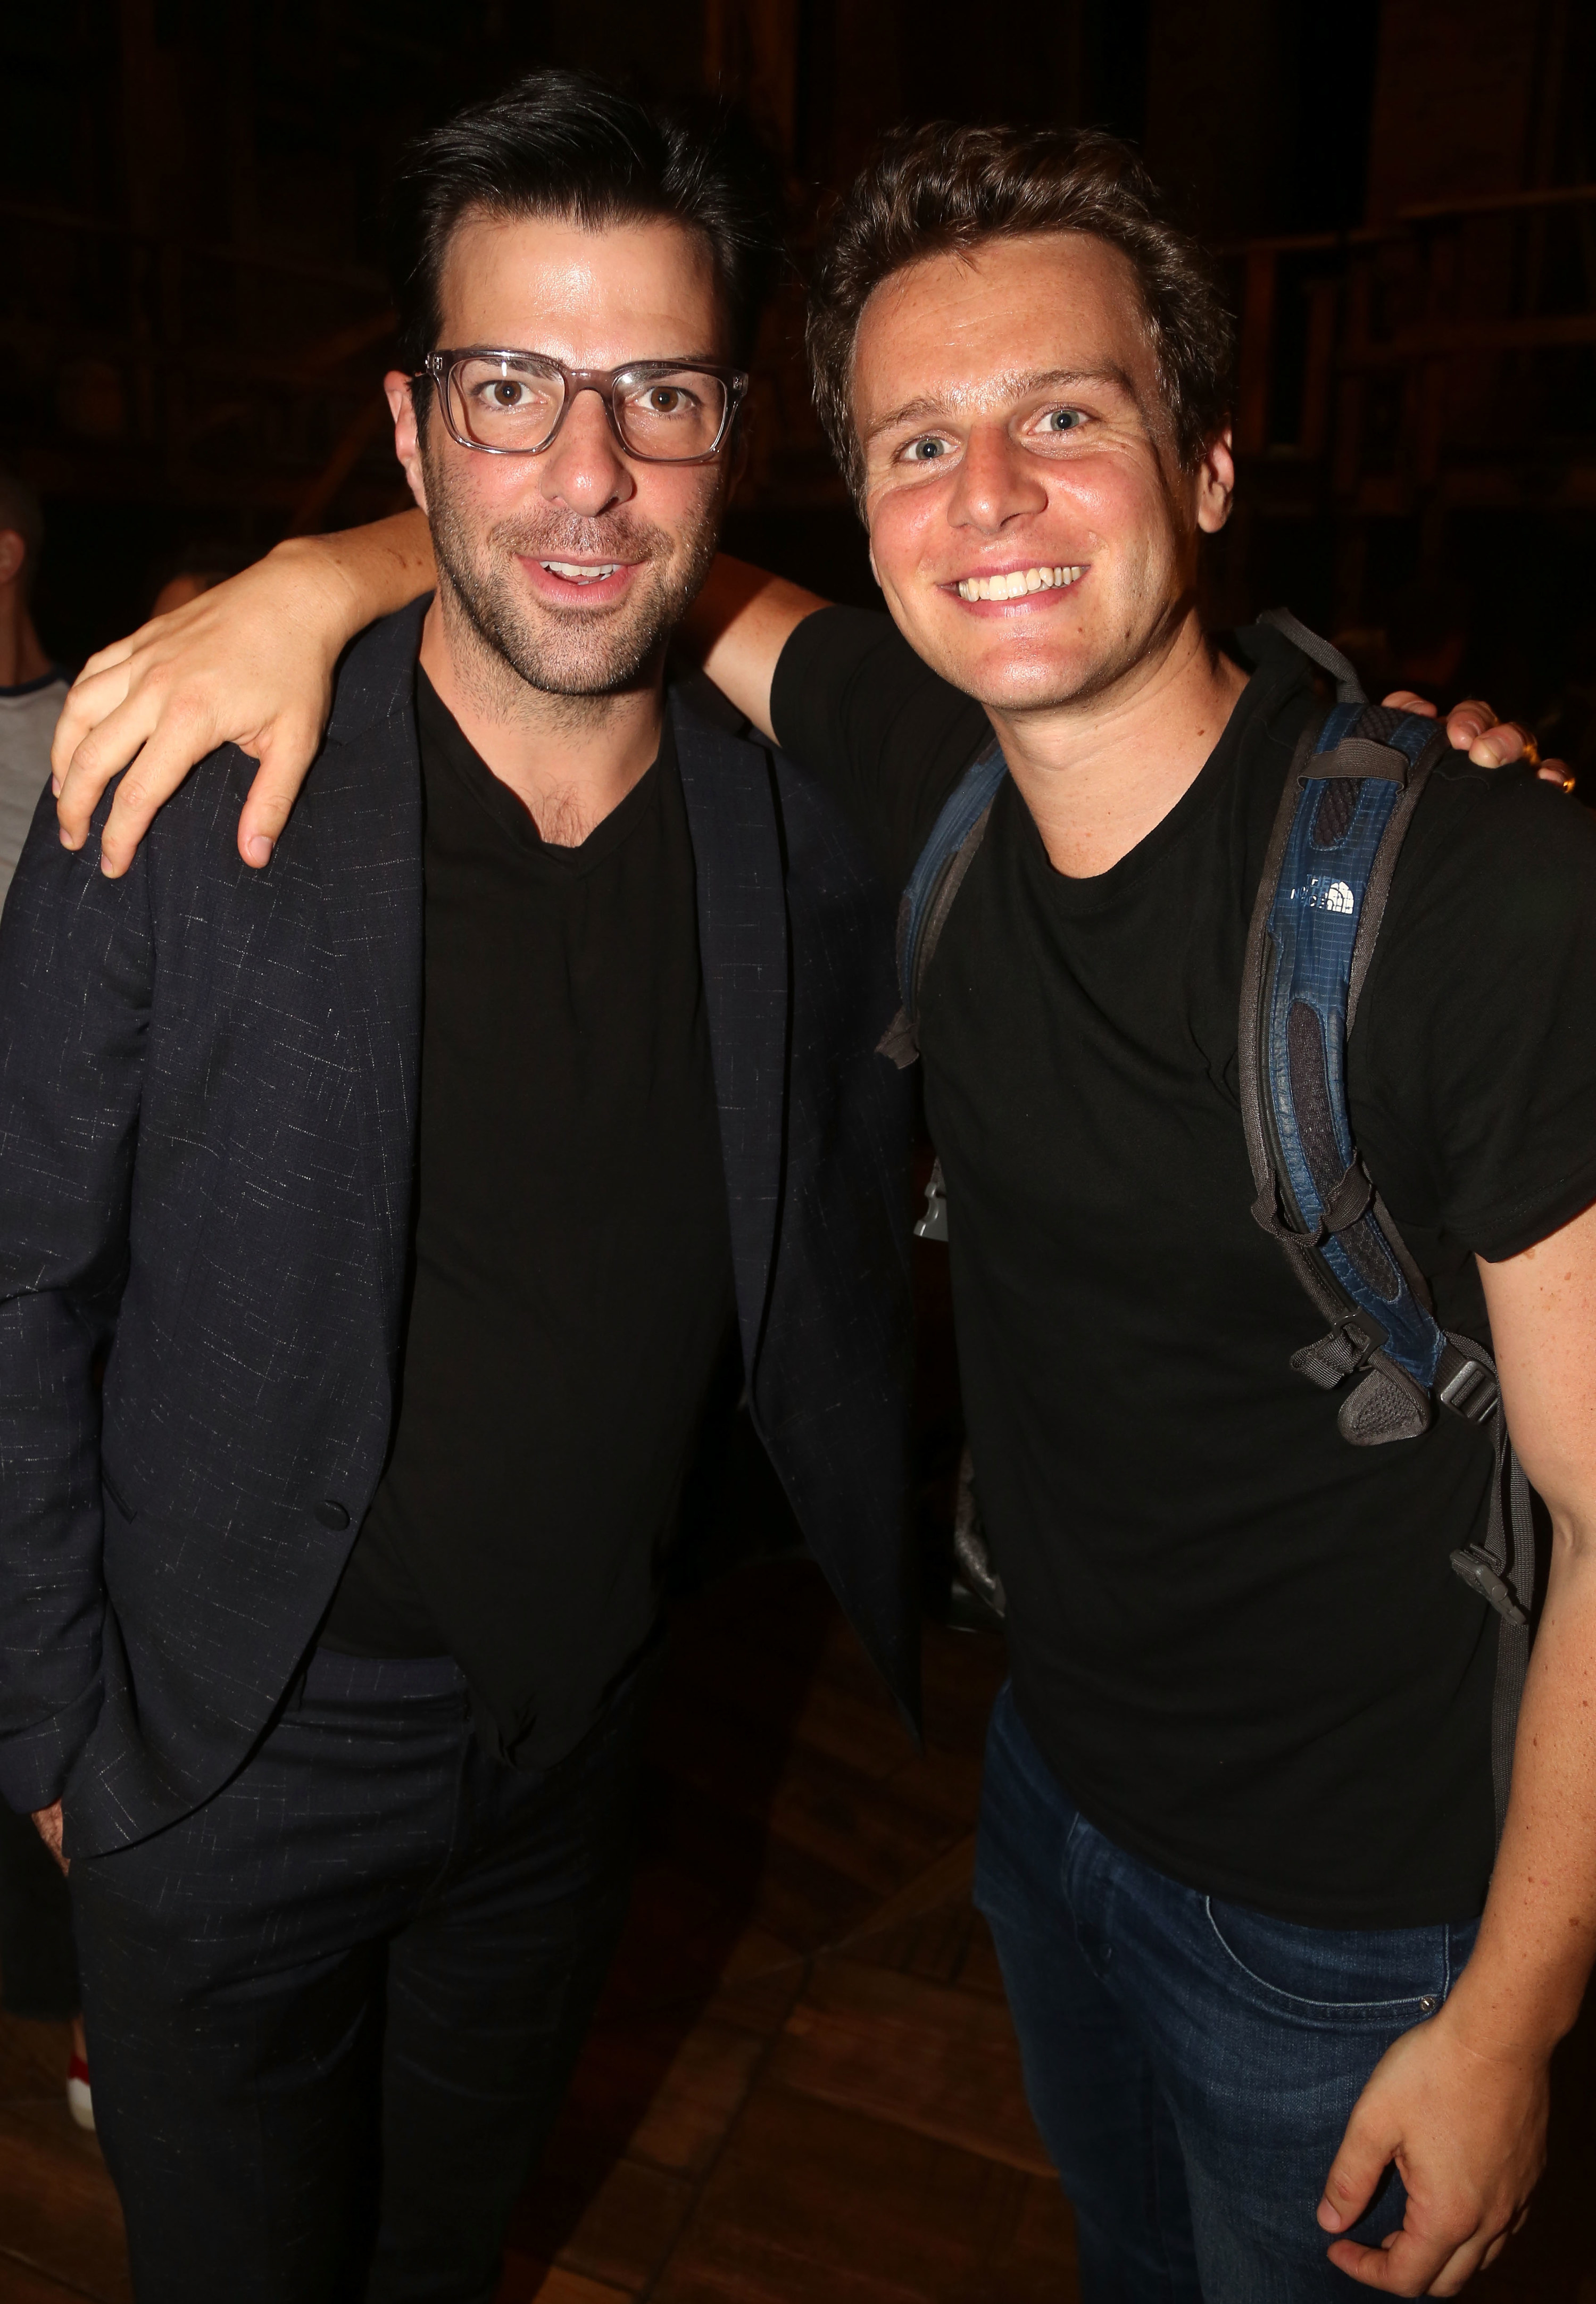 Zachary Quinto wearing a blazer and pants and Jonathan Groff wearing a plain dark t-shirt and jeans with their arms around each other